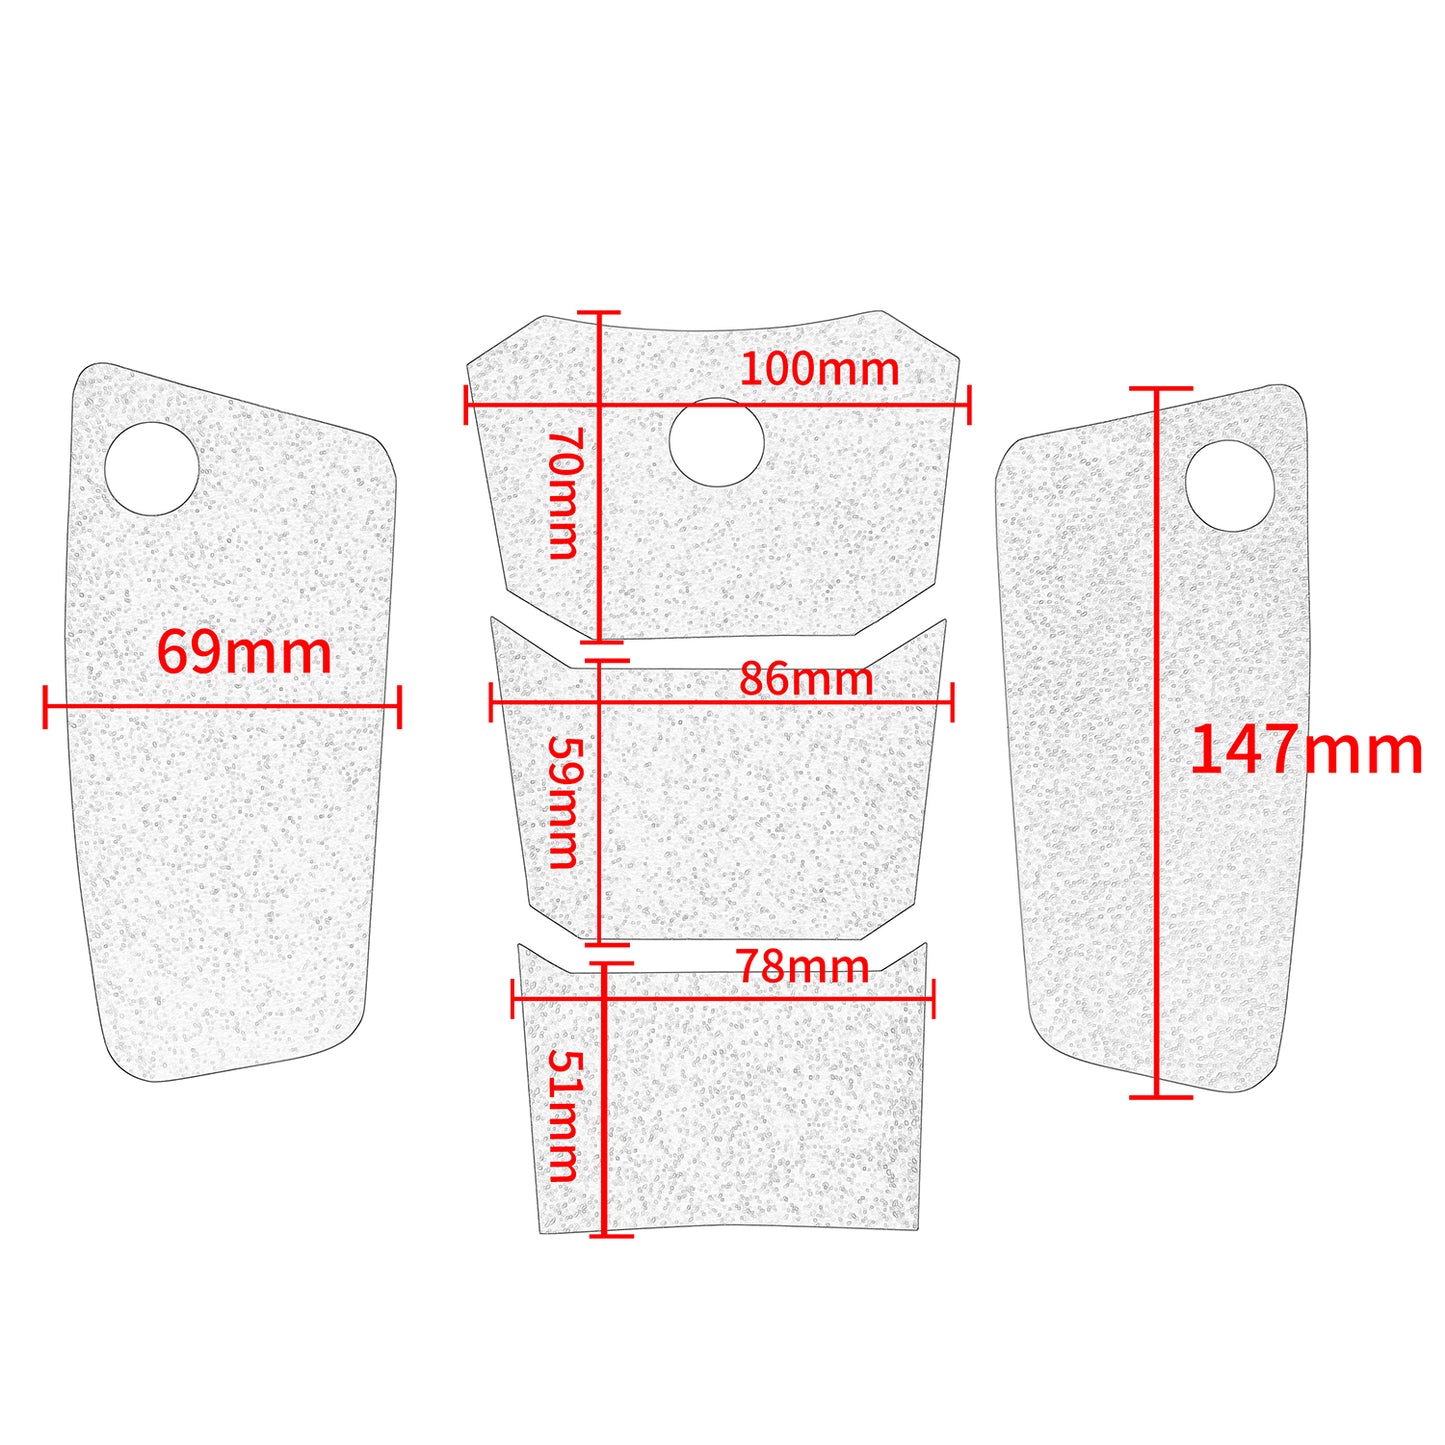 Wolfline Motorcycle Anti Slip Tank Pad Stickers Side Gas Tank Pad Knee Grip Decals Protection For Kawasaki Versys650 Versys 650 2015 2016 2017 2018 2019 2020 2021